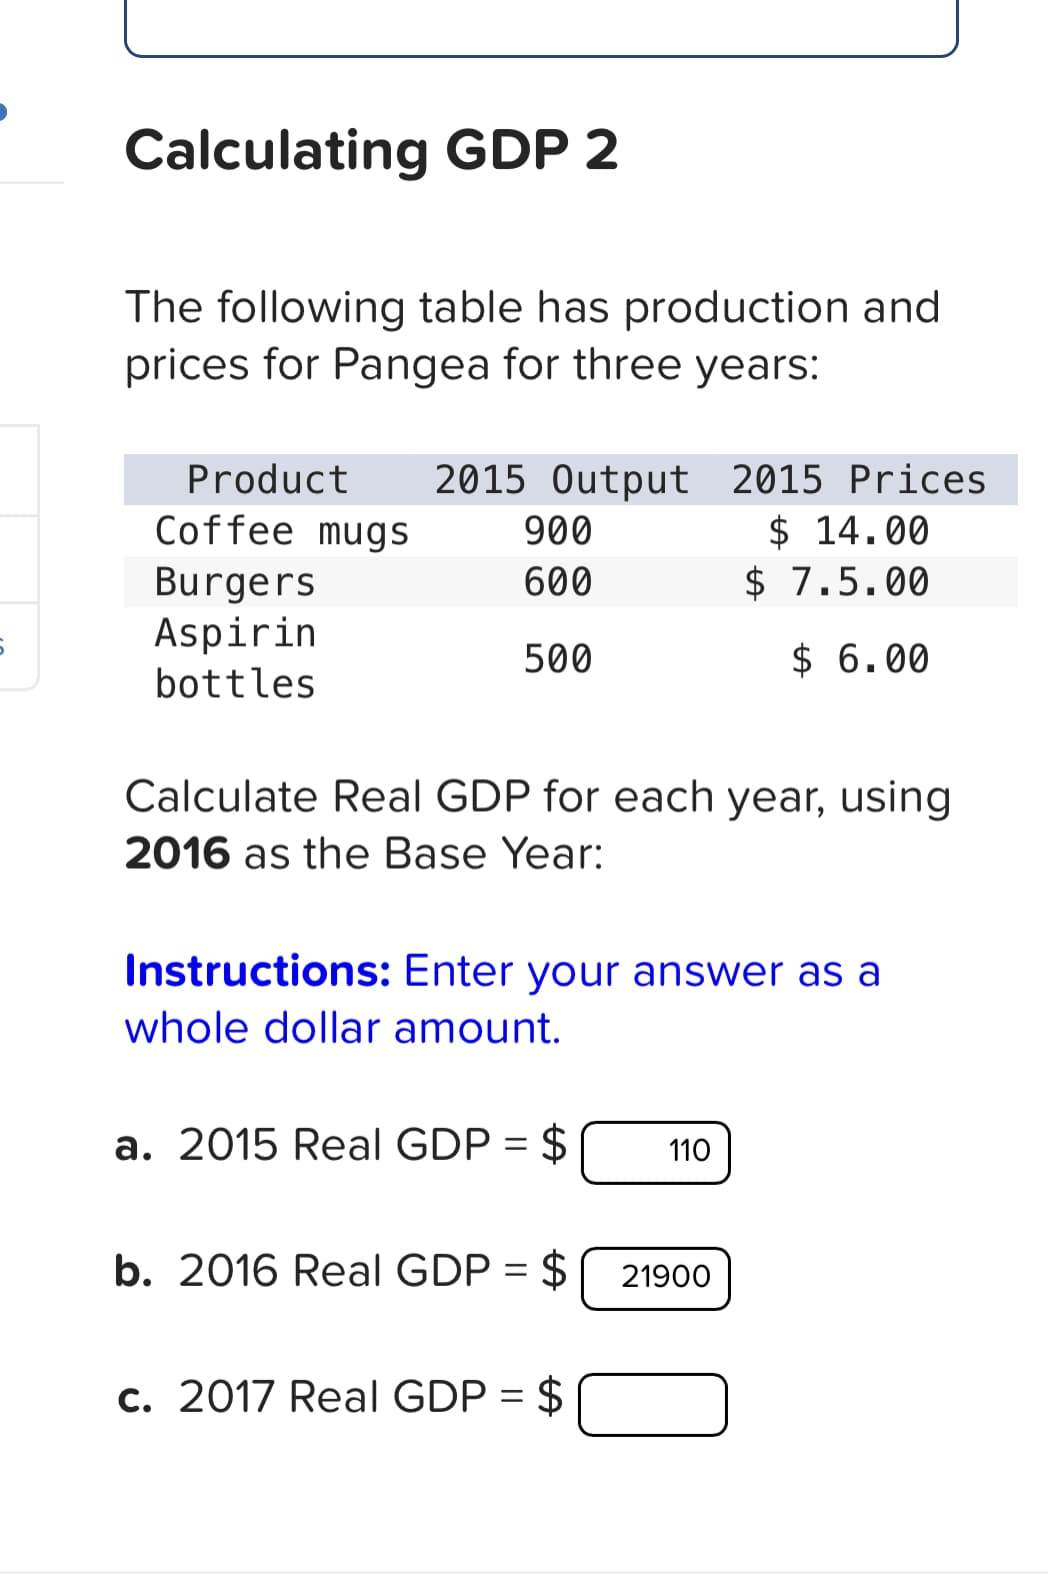 Calculating GDP 2
The following table has production and
prices for Pangea for three years:
Product 2015 Output 2015 Prices
Coffee mugs
900
$ 14.00
Burgers
600
$ 7.5.00
Aspirin
500
$ 6.00
bottles
Calculate Real GDP for each year, using
2016 as the Base Year:
Instructions: Enter your answer as a
whole dollar amount.
a. 2015 Real GDP = $
b. 2016 Real GDP = $
c. 2017 Real GDP = $
110
21900